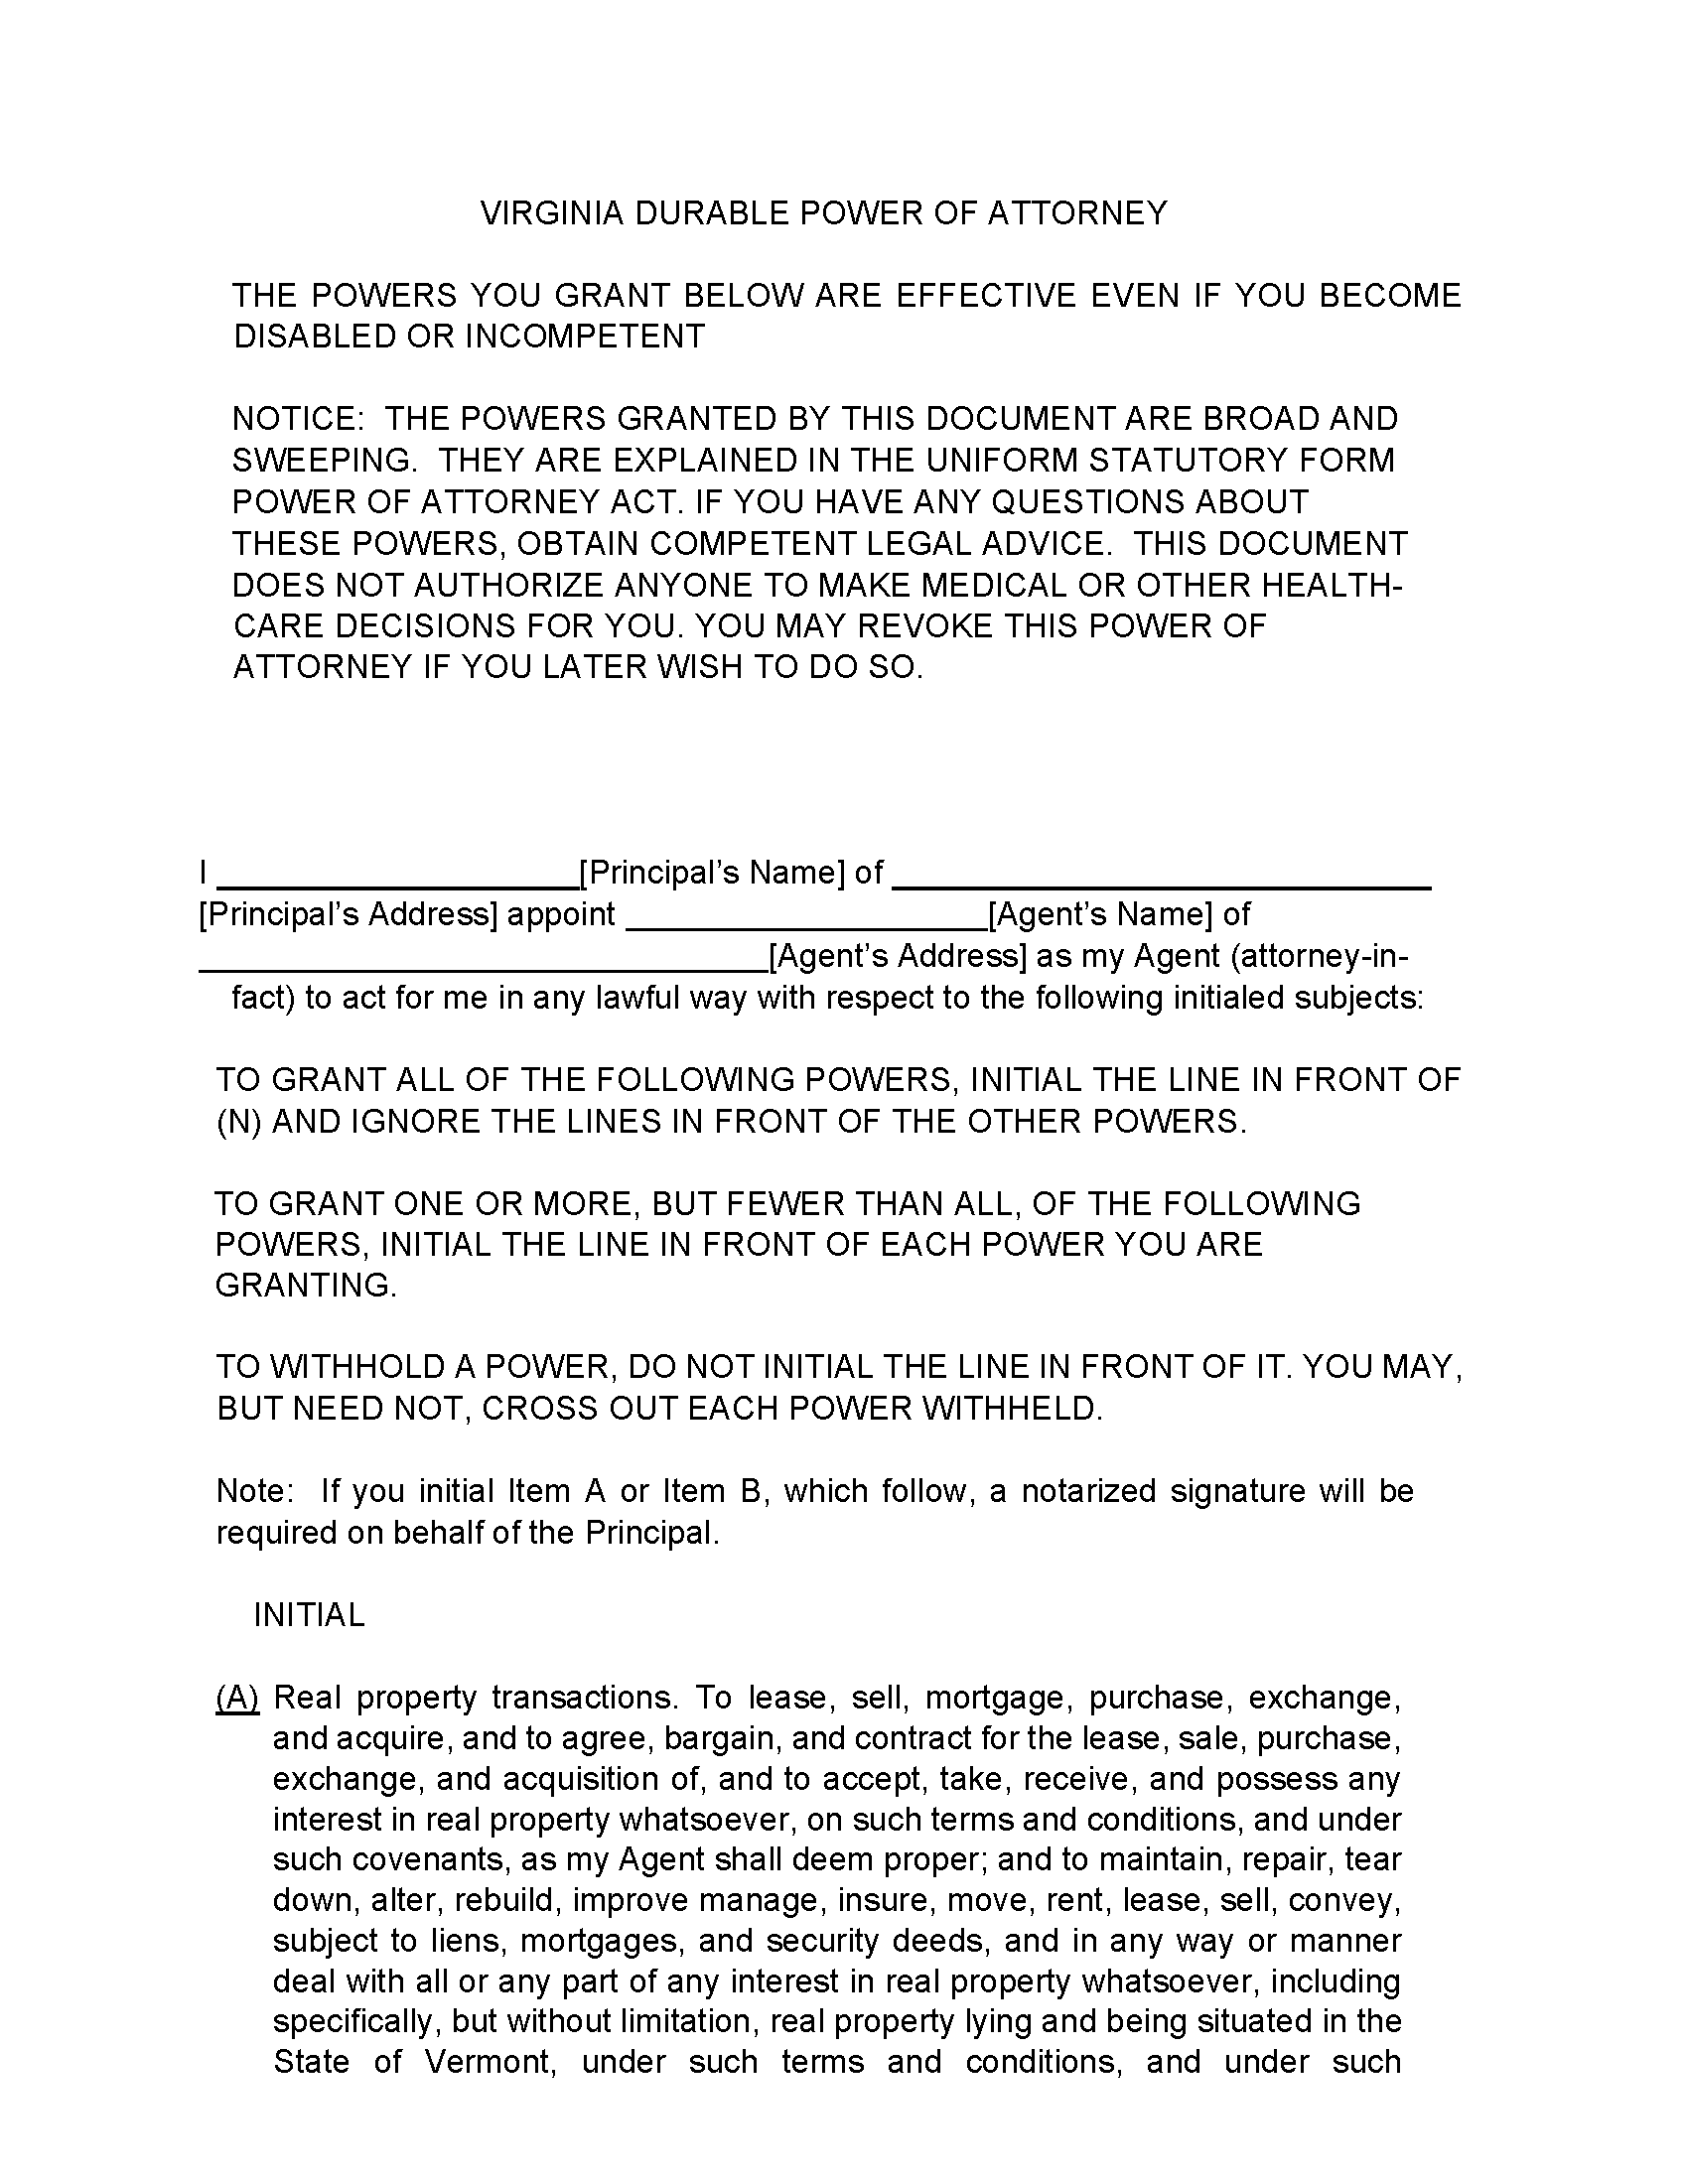 virginia-durable-power-of-attorney-form-fillable-pdf-free-printable